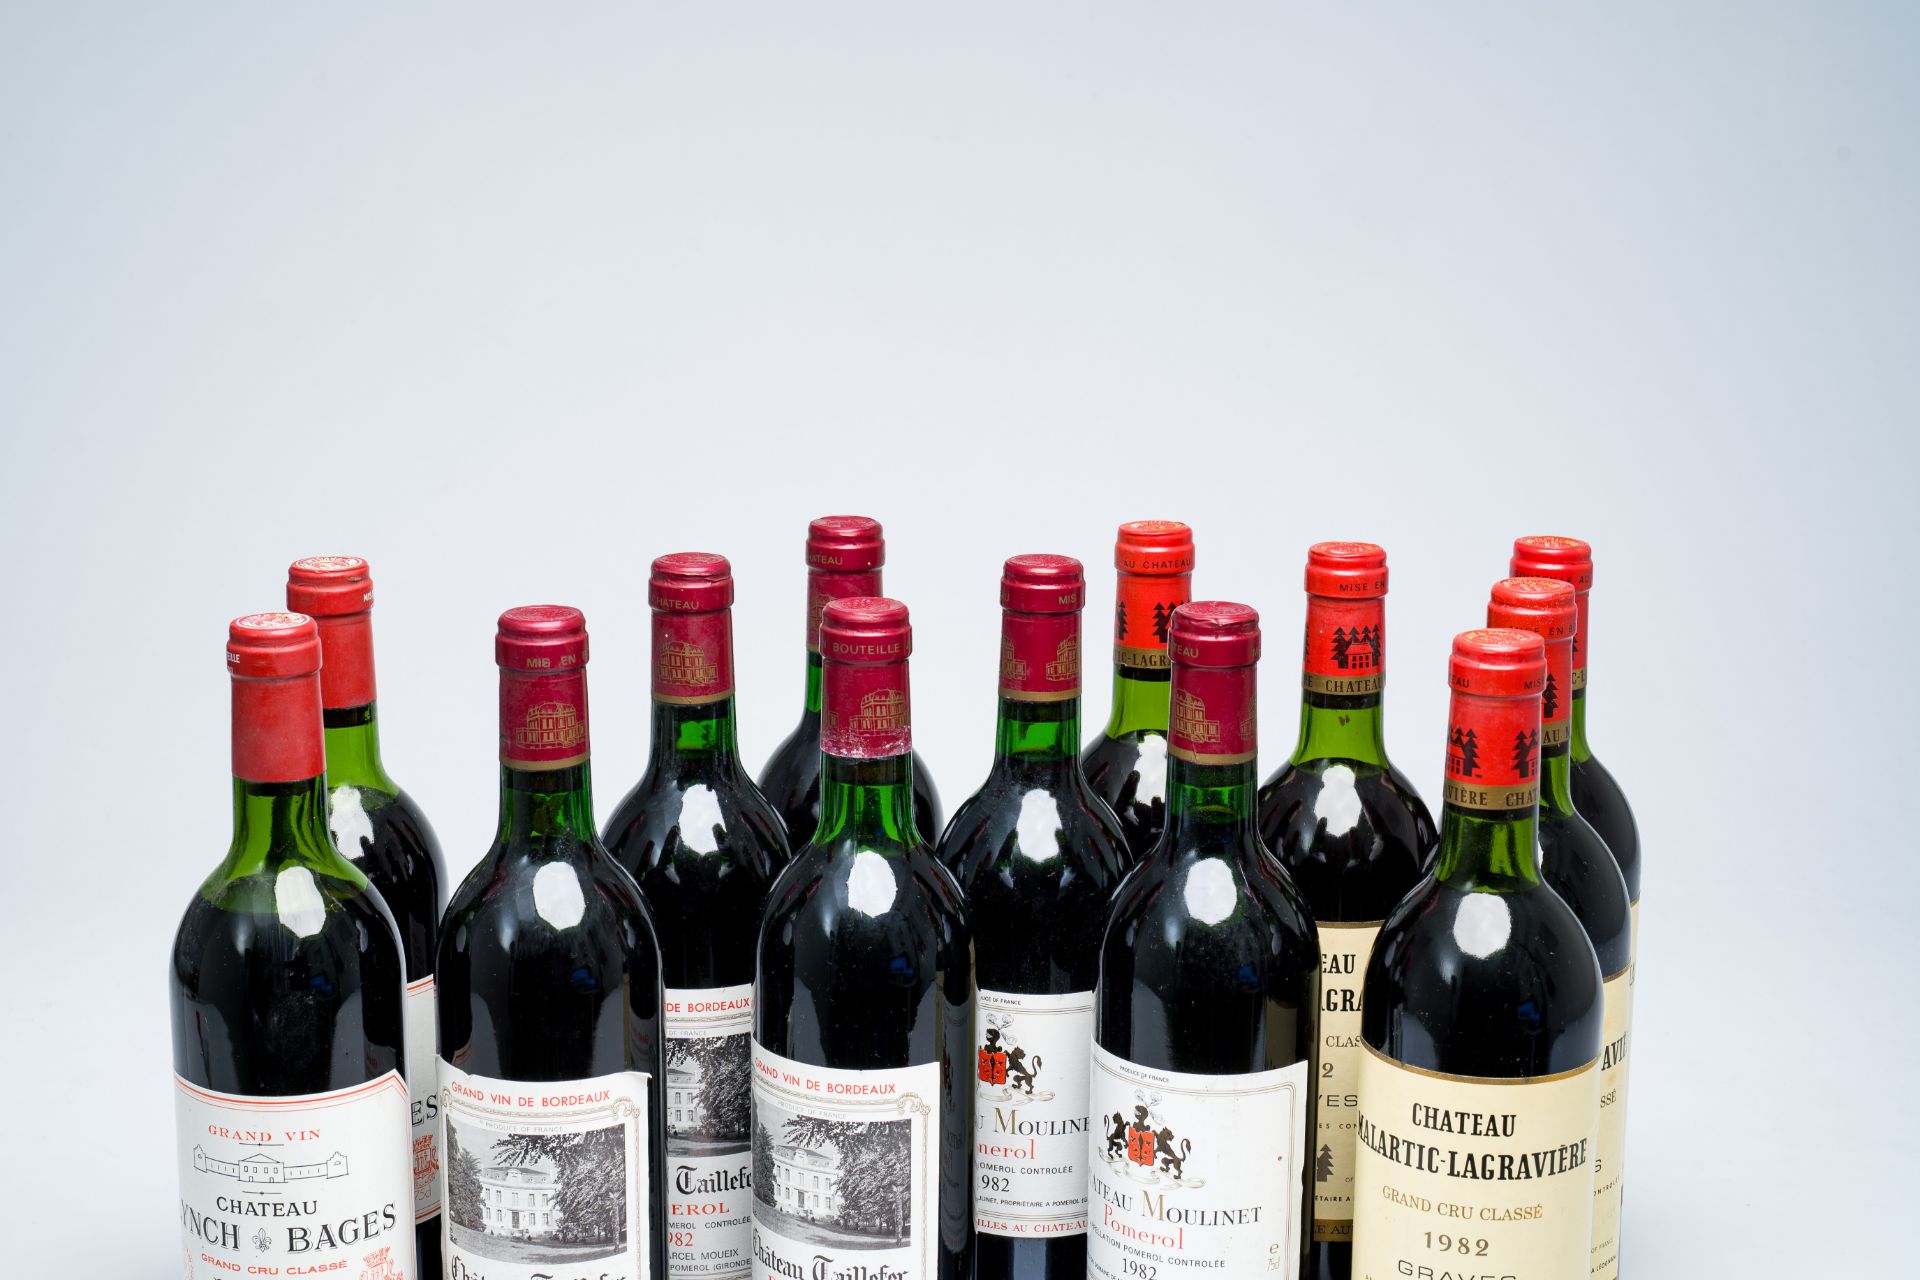 Five bottles of Chateau Malartic-Lagraviere, 4 bot. Ch. Taillefer Pomerol, 2 bot. Ch. Moulinet Pomer - Image 4 of 4